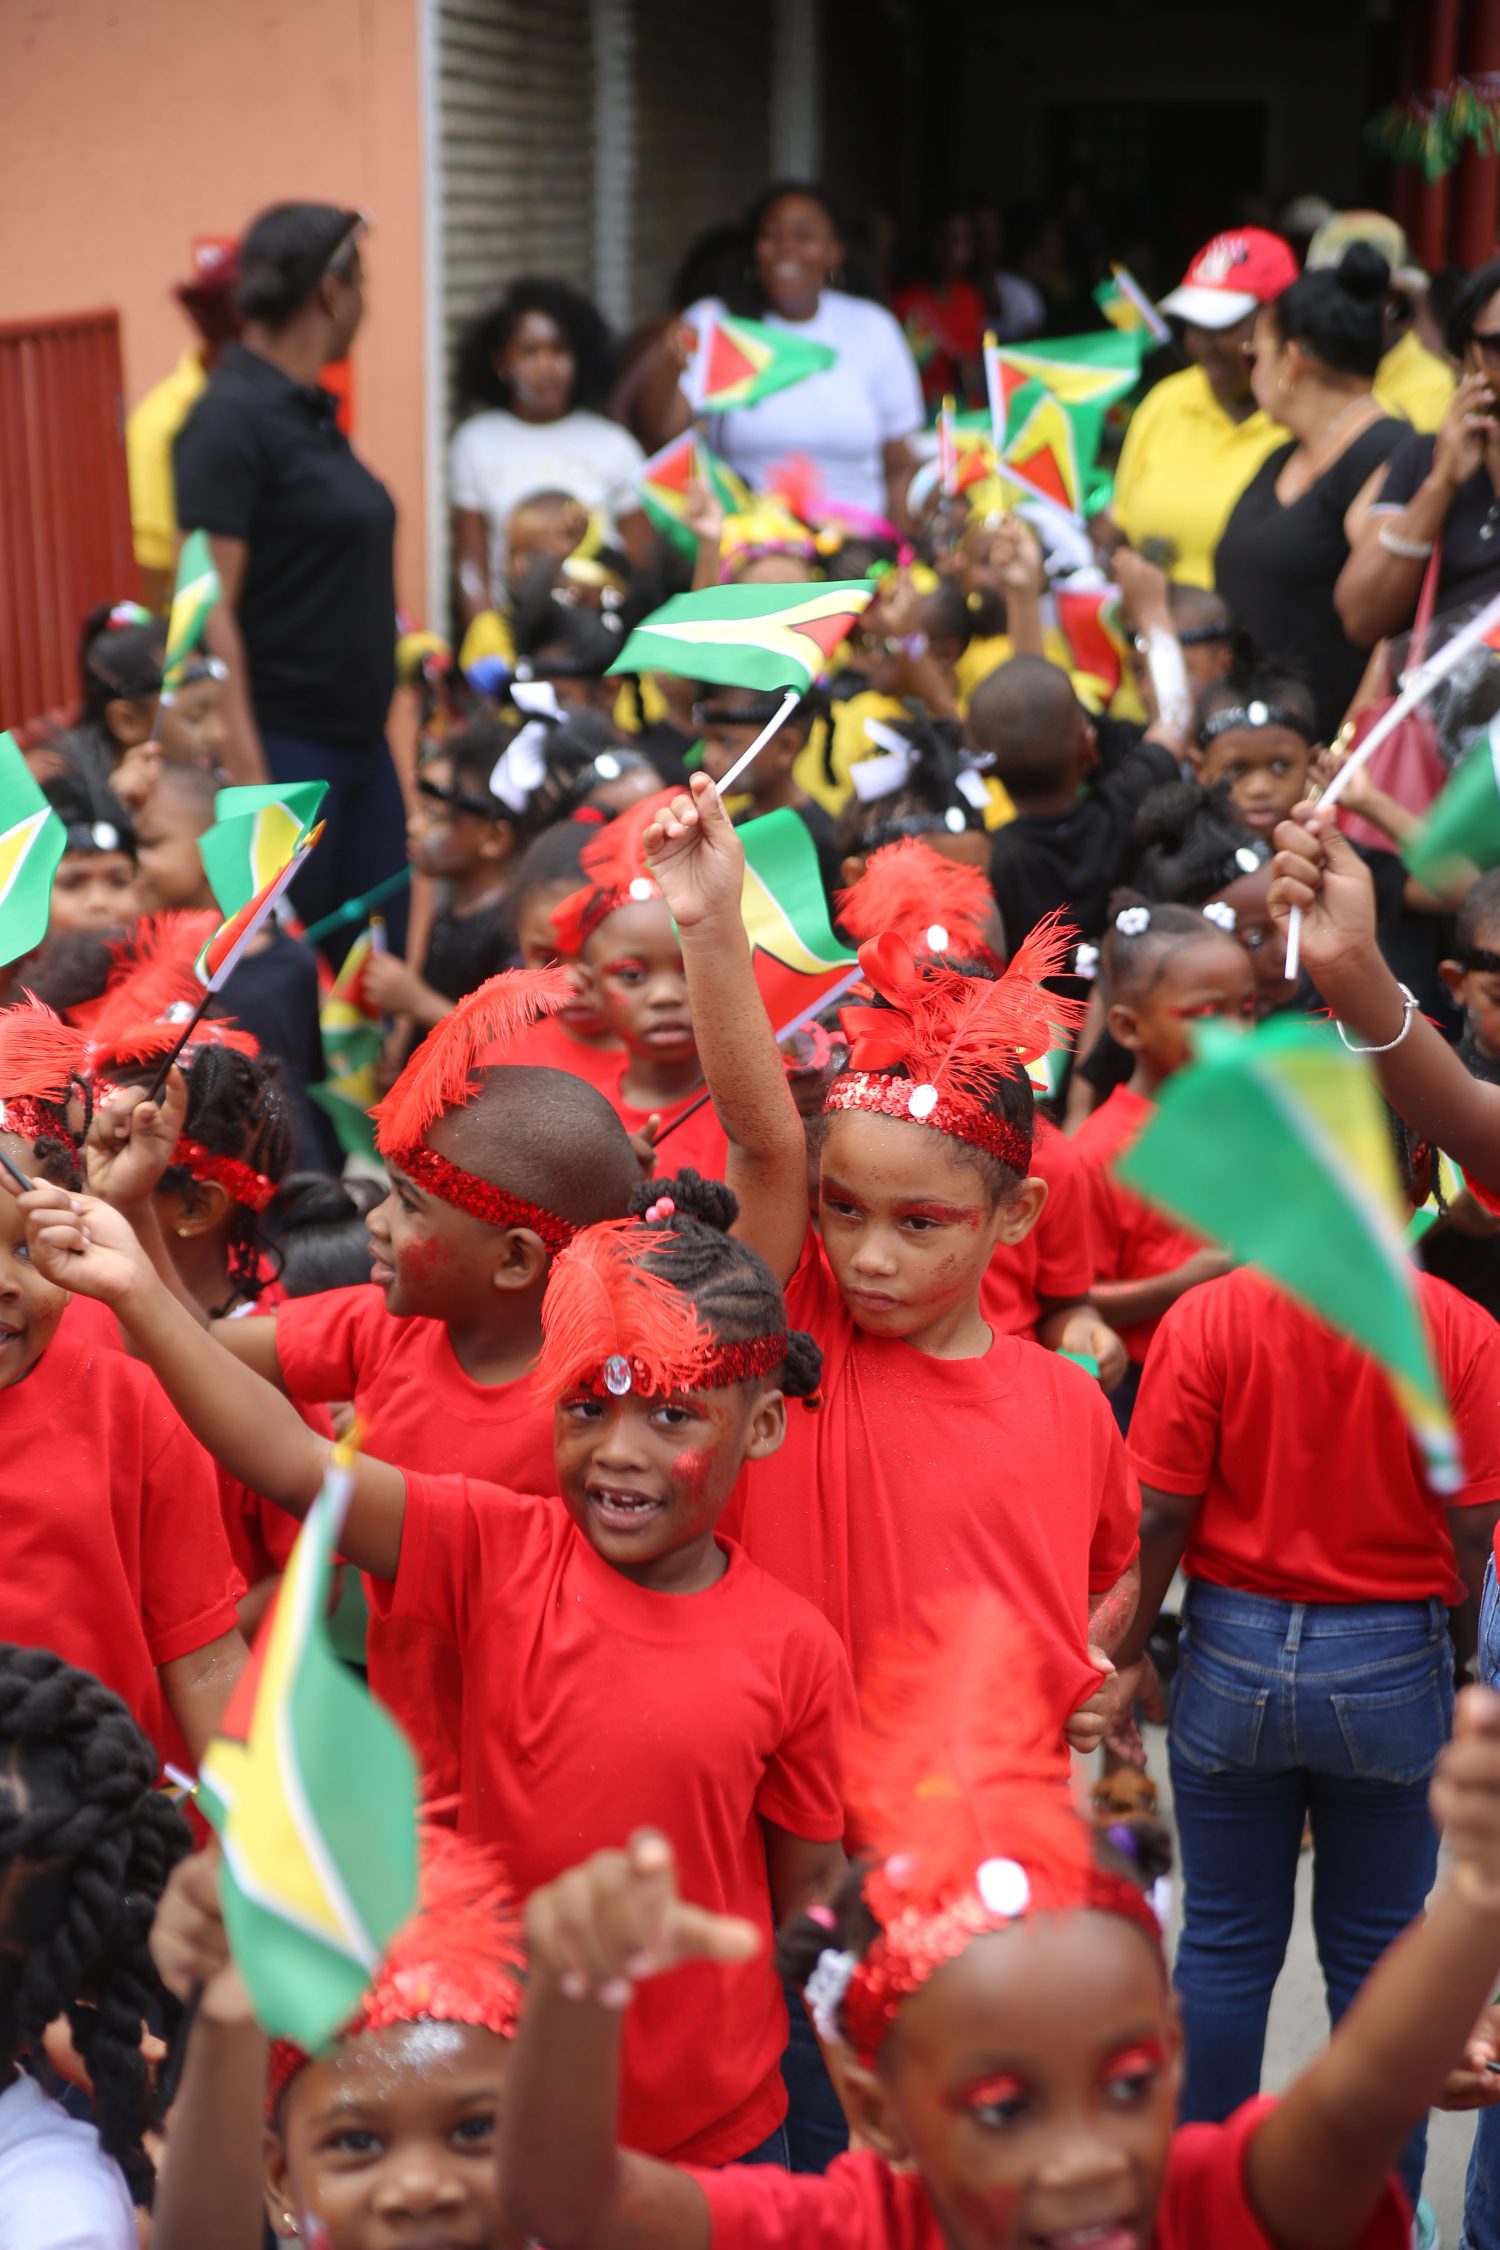 Cherished Lambs students took to the streets on Thursday decked out in brightly coloured outfits as part of the Mashramani celebrations (Photo by Keno George)